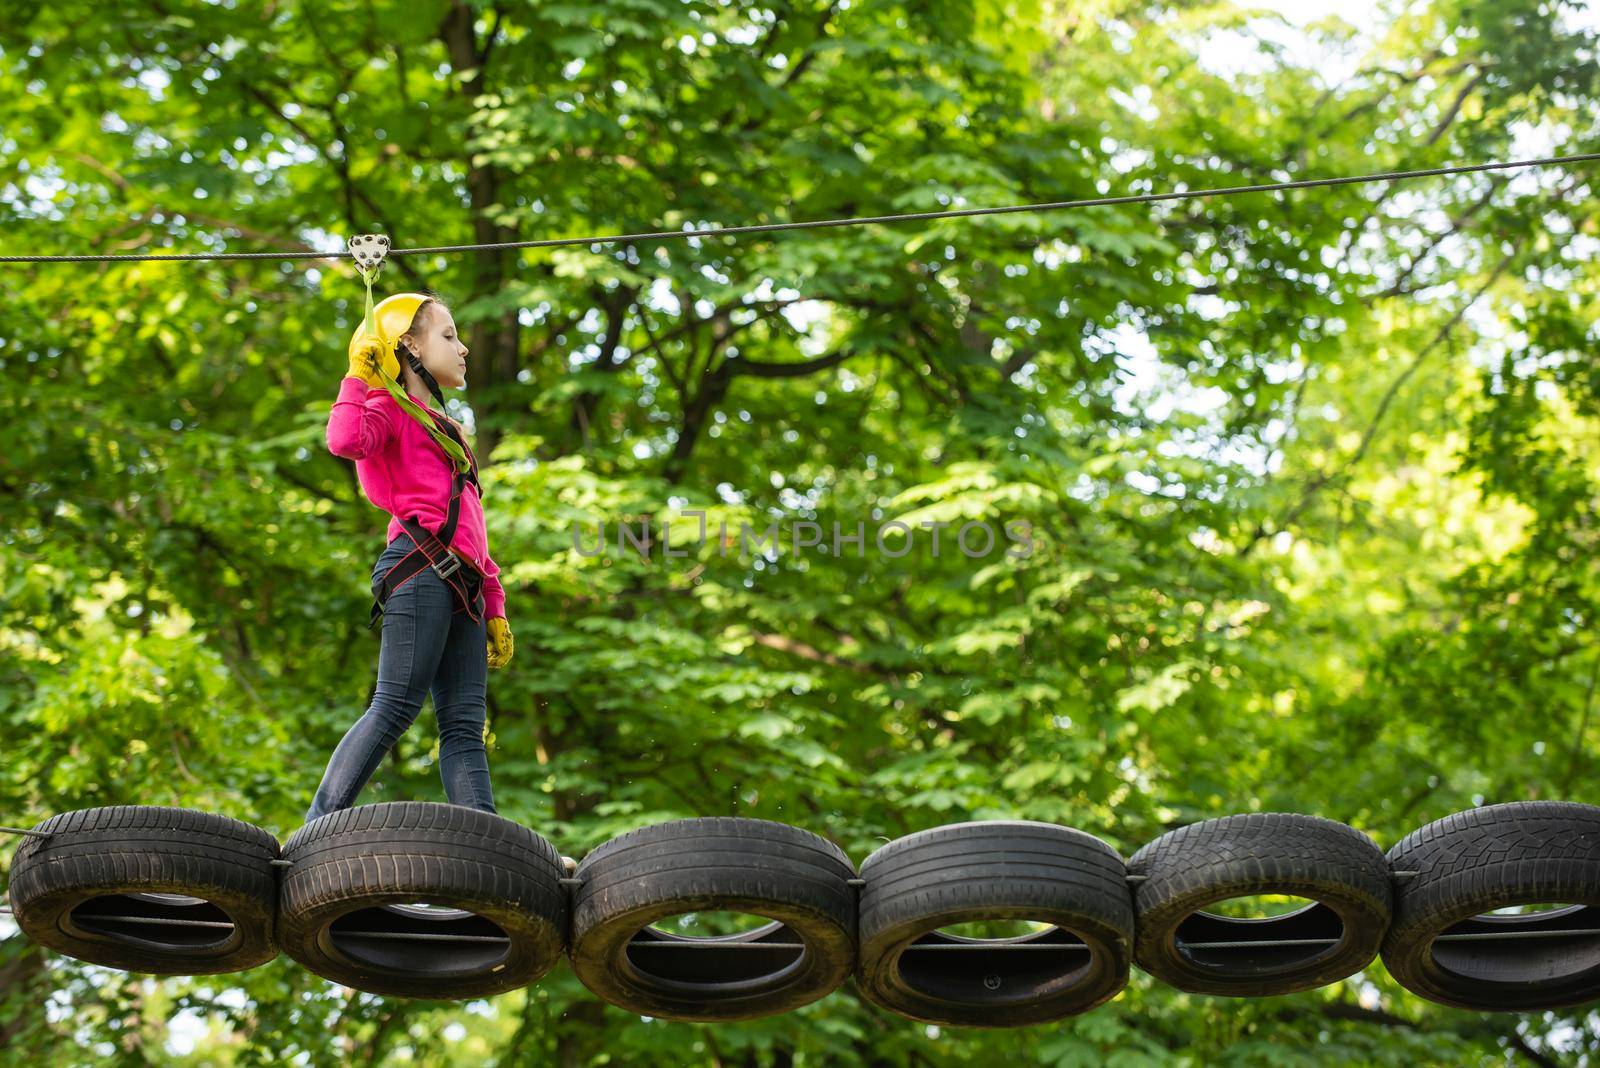 Active children. Helmet - safety equipment for Child playing. Cargo net climbing and hanging log. Eco Resort Activities. Safe Climbing extreme sport with helmet. High ropes walk